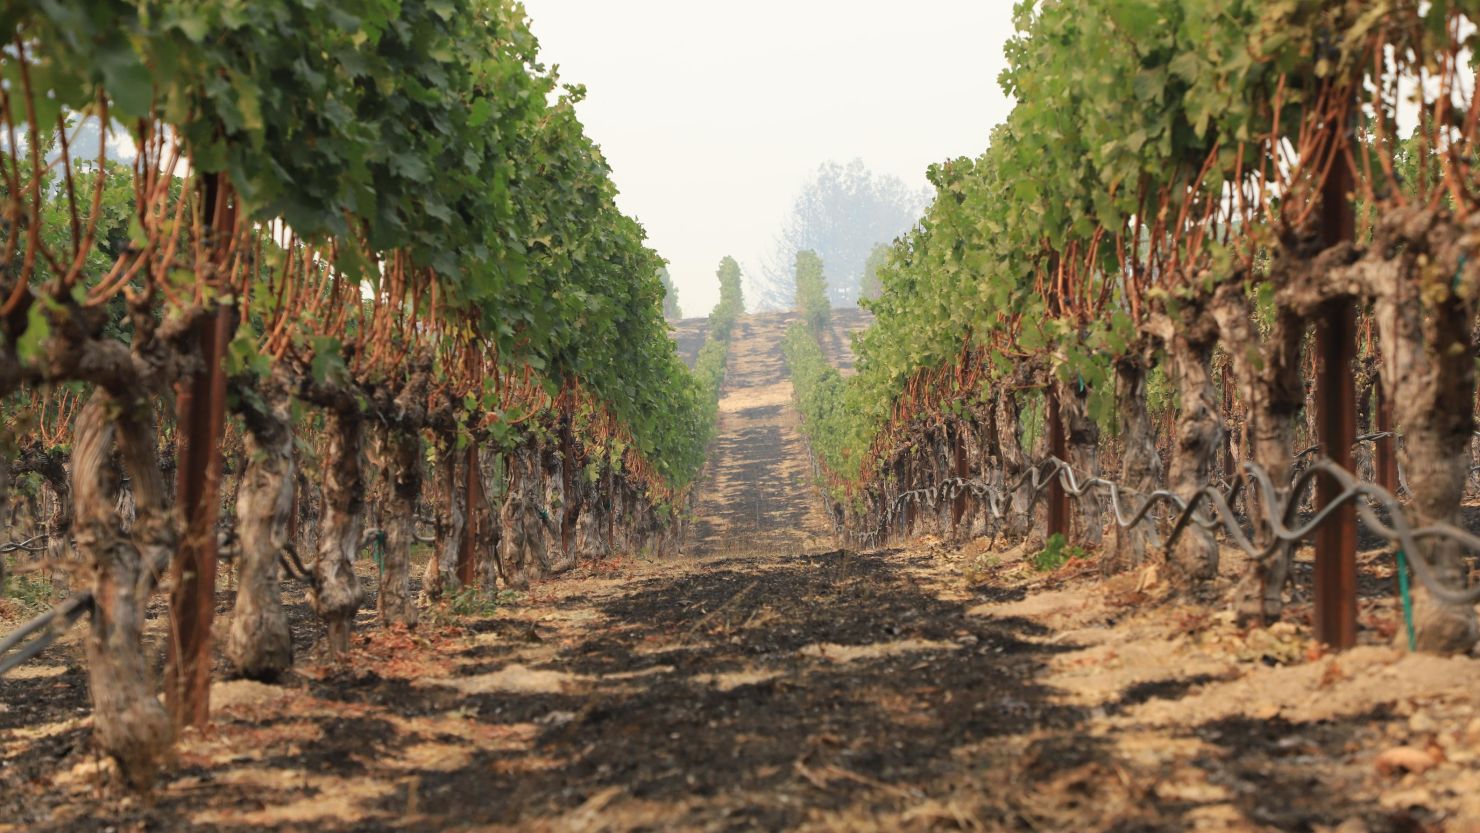 The vineyard at Schramsberg winery outside Calistoga, California, largely escaped fire damage.